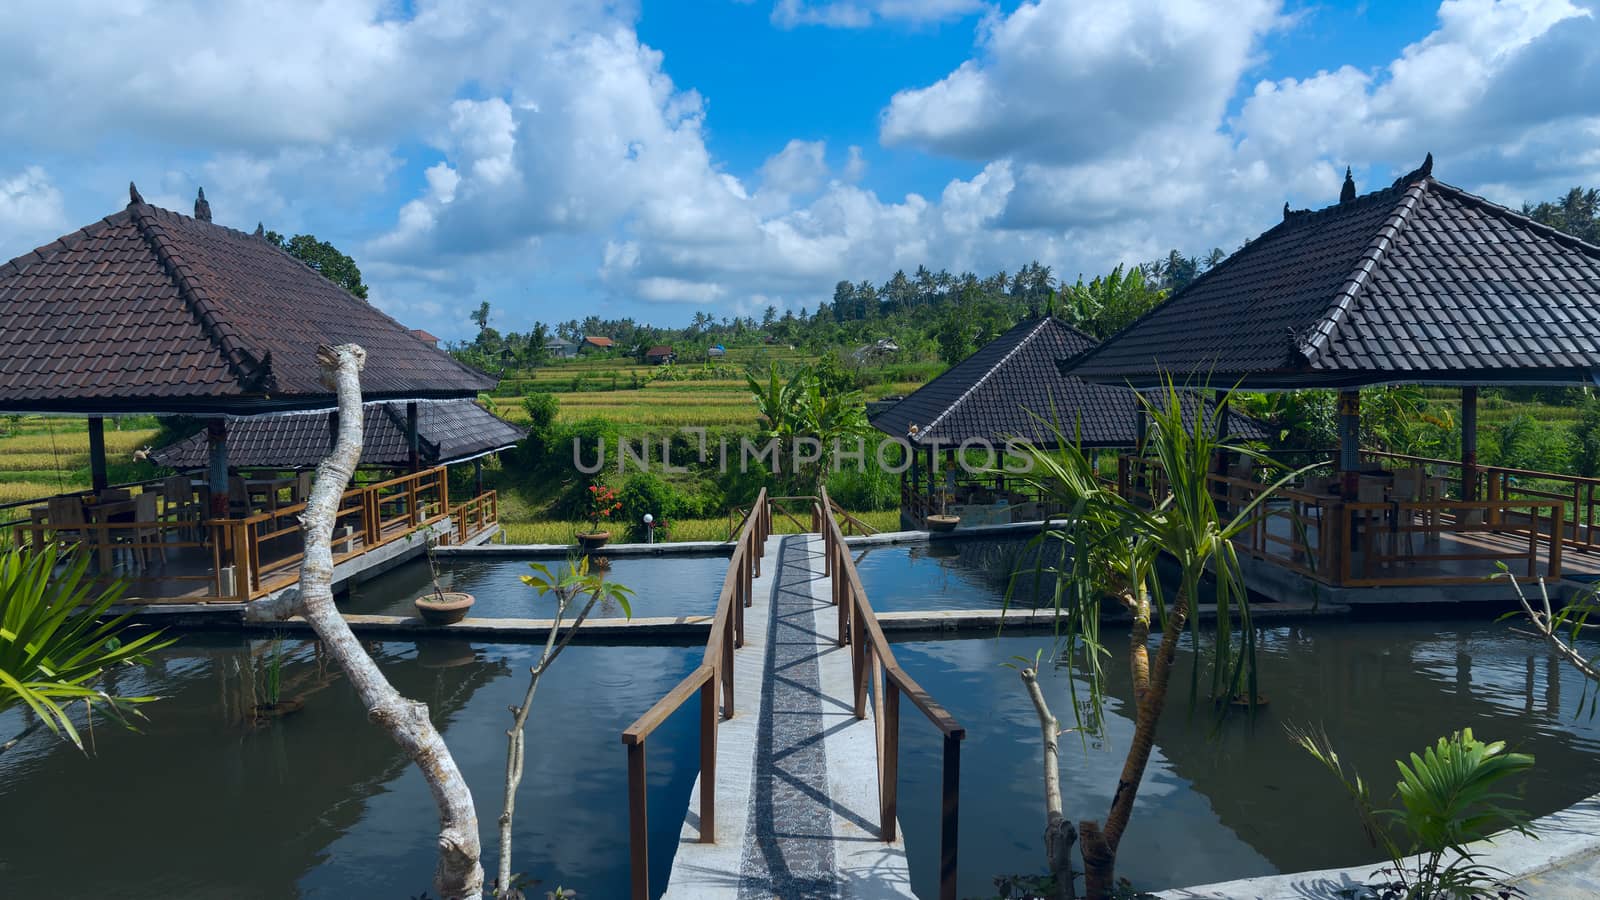 Pavilions on the background of the rice fields in Bali in Indonesia